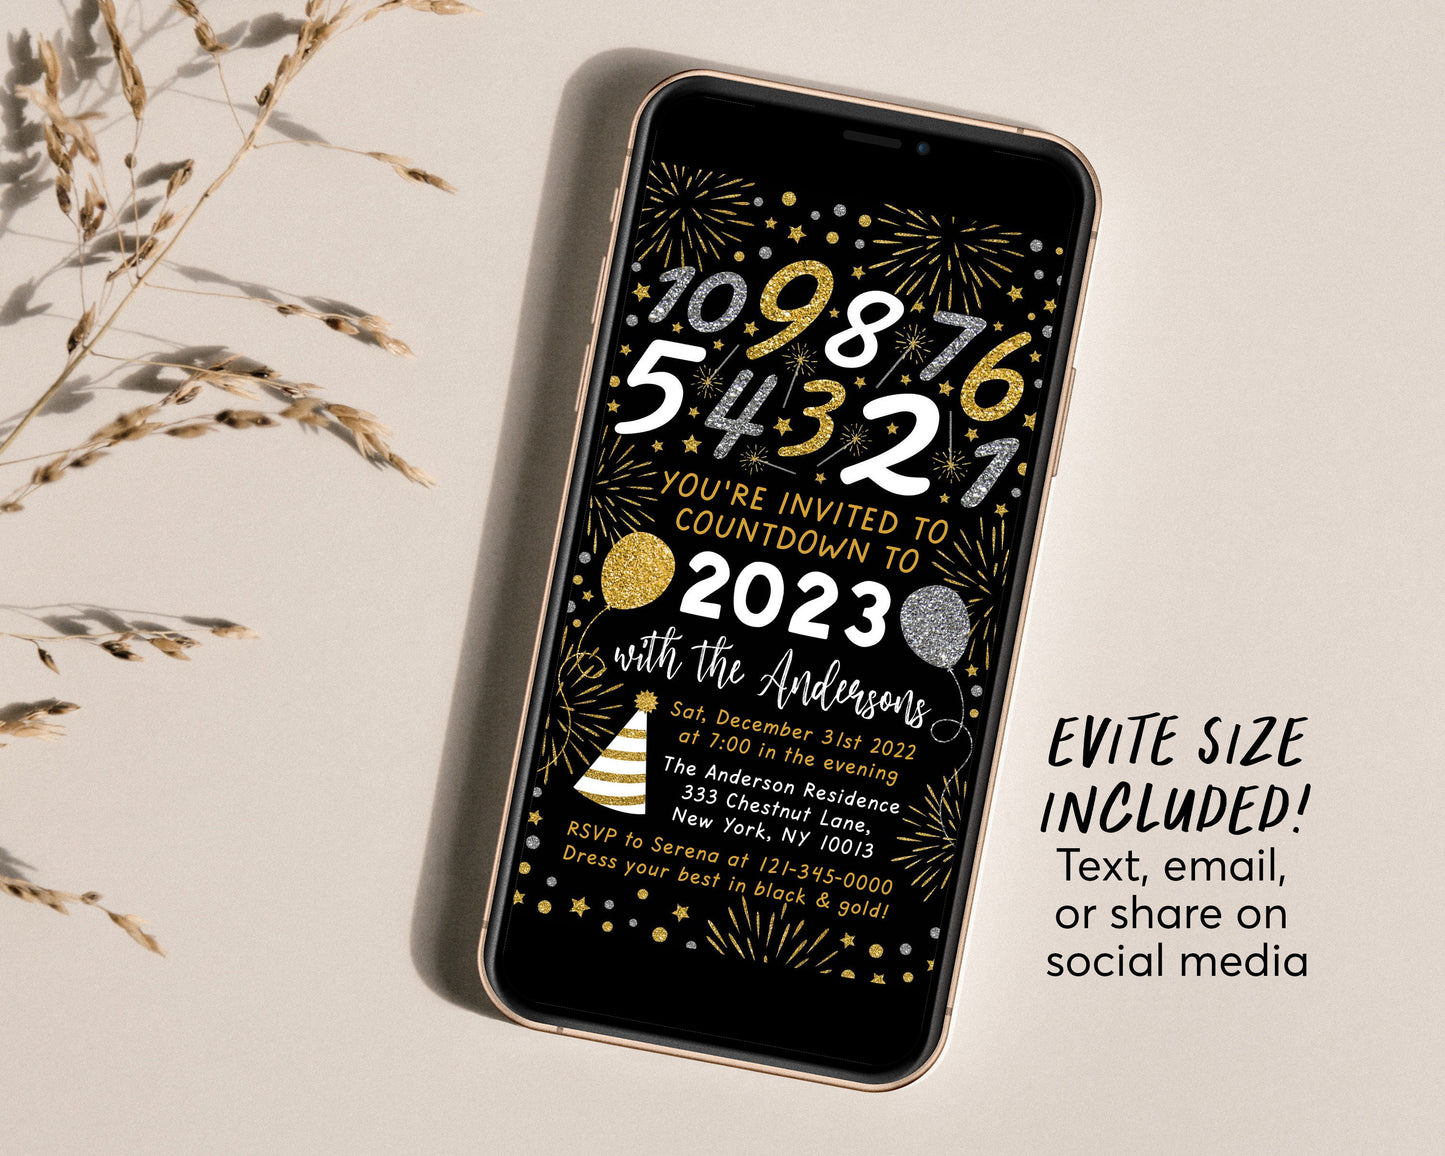 New Years Eve Countdown Party Invitation Editable Template, Adult NYE Holiday Party Invite Printable, Gold Glitter Black Cocktail Evite